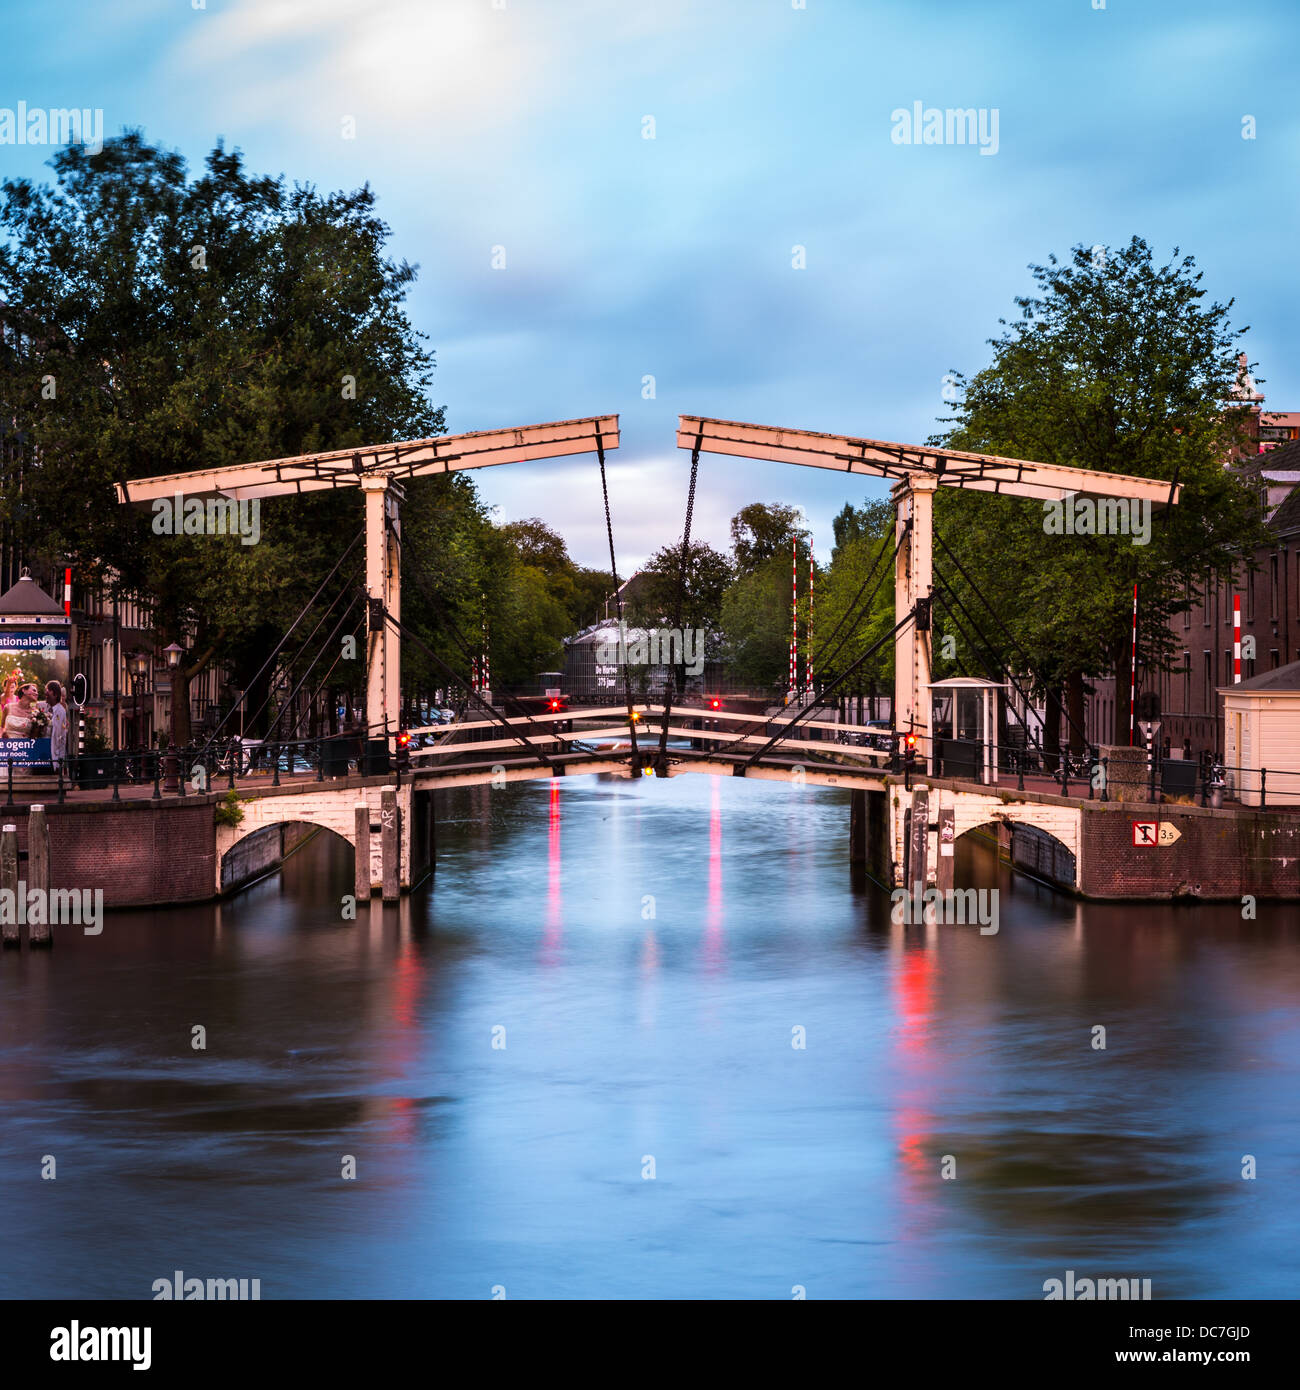 A bascule bridge across a canal in Amsterdam, at dusk Stock Photo